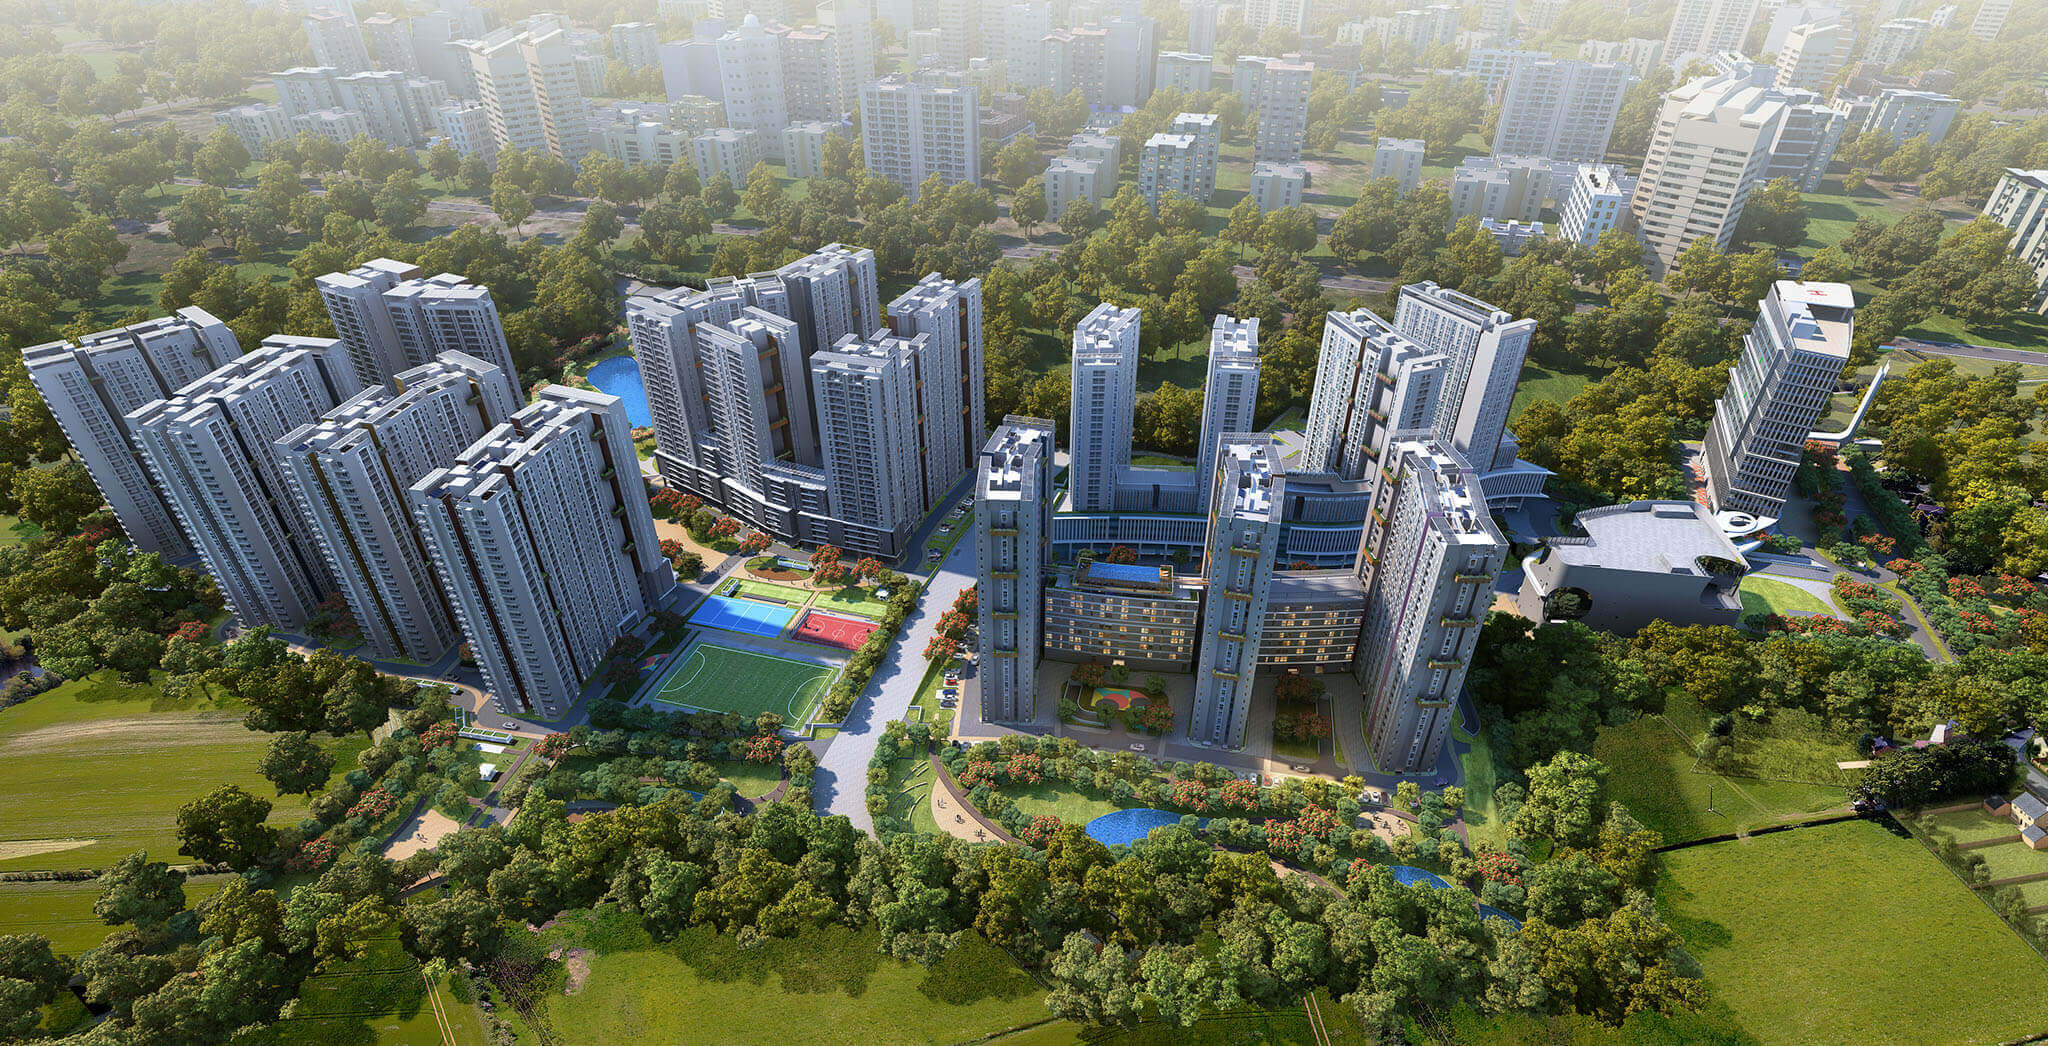 Top Selling 2021 Apartments in Bangalore